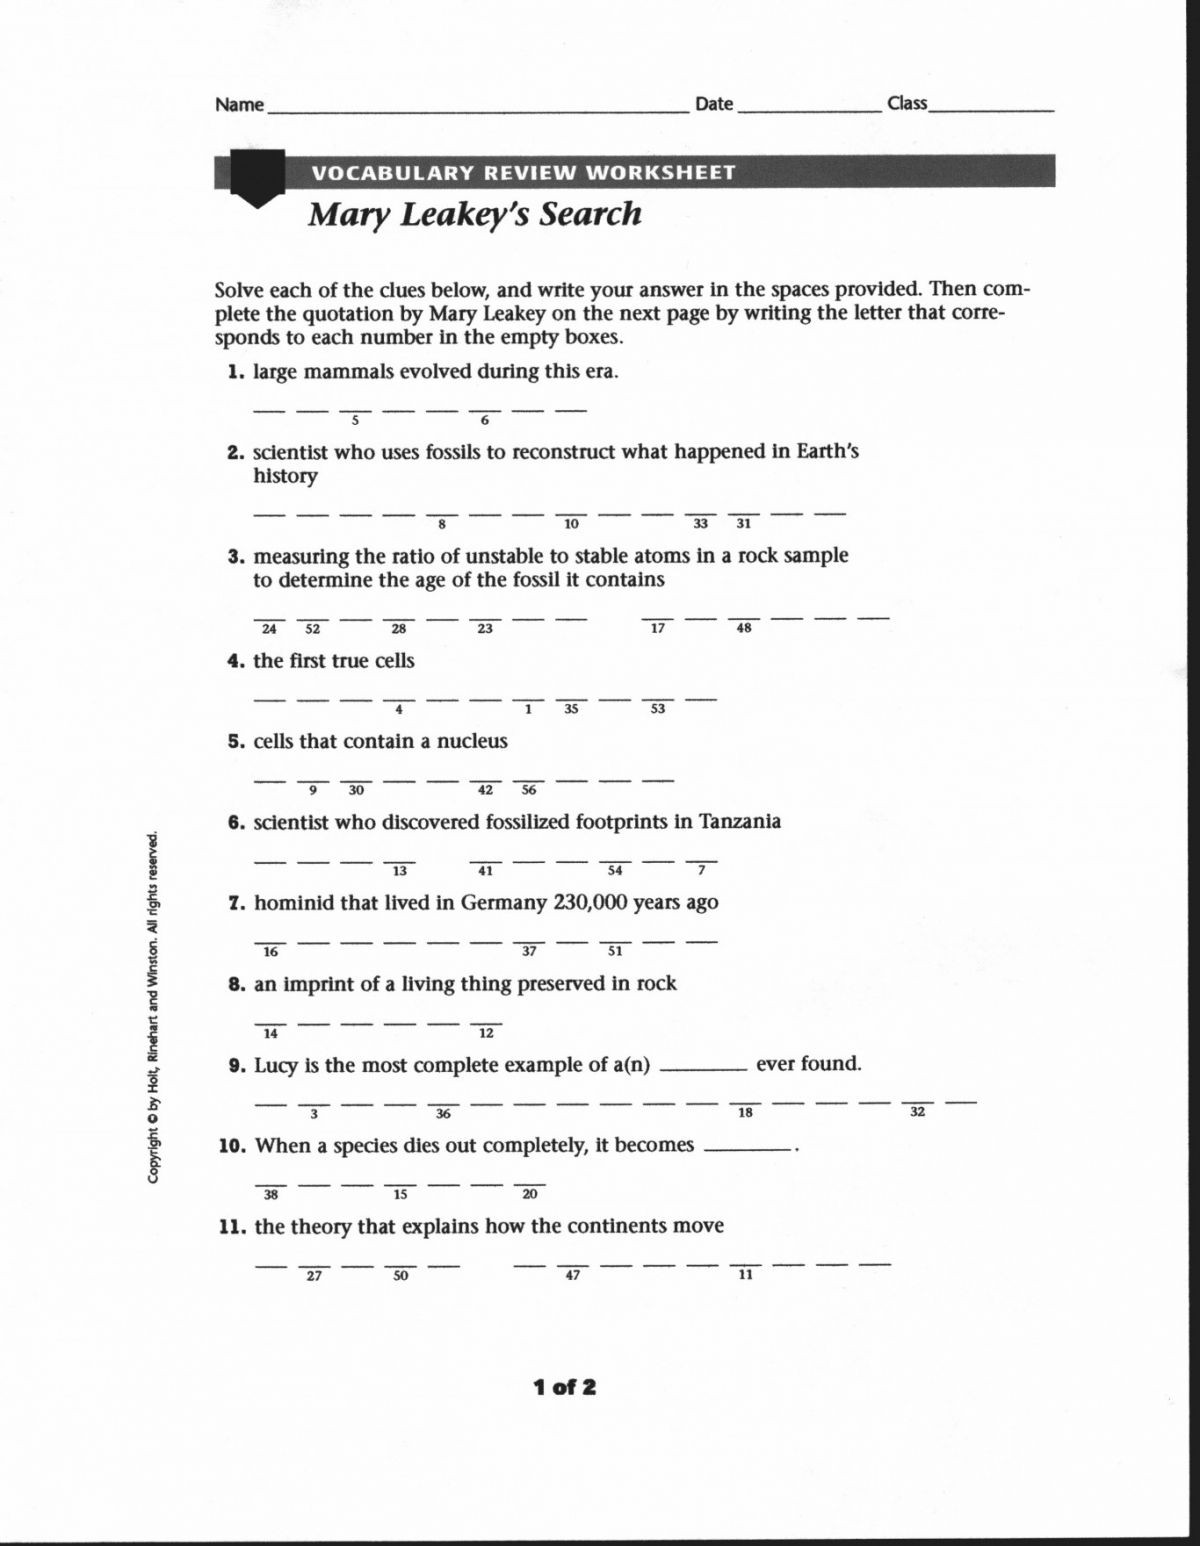 Onion Cell Mitosis Worksheet Answers 34 Ion Cell Mitosis Worksheet Answers Worksheet Project List